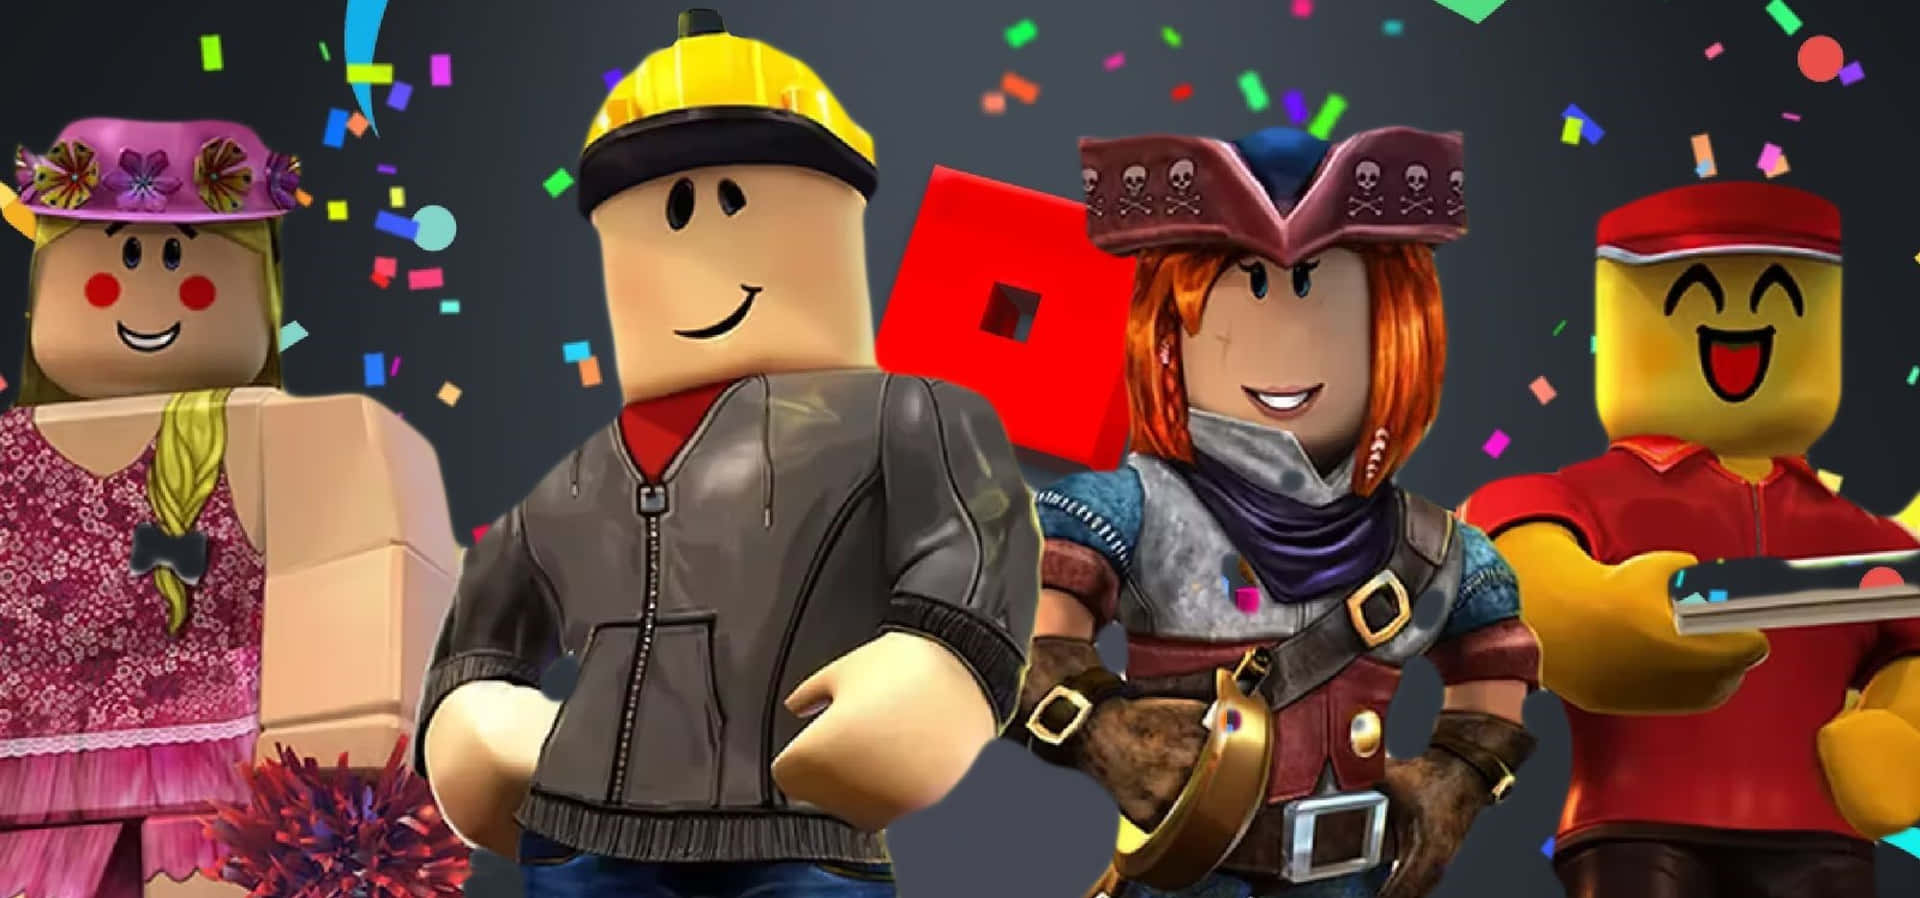 100+] Cool Roblox Pictures